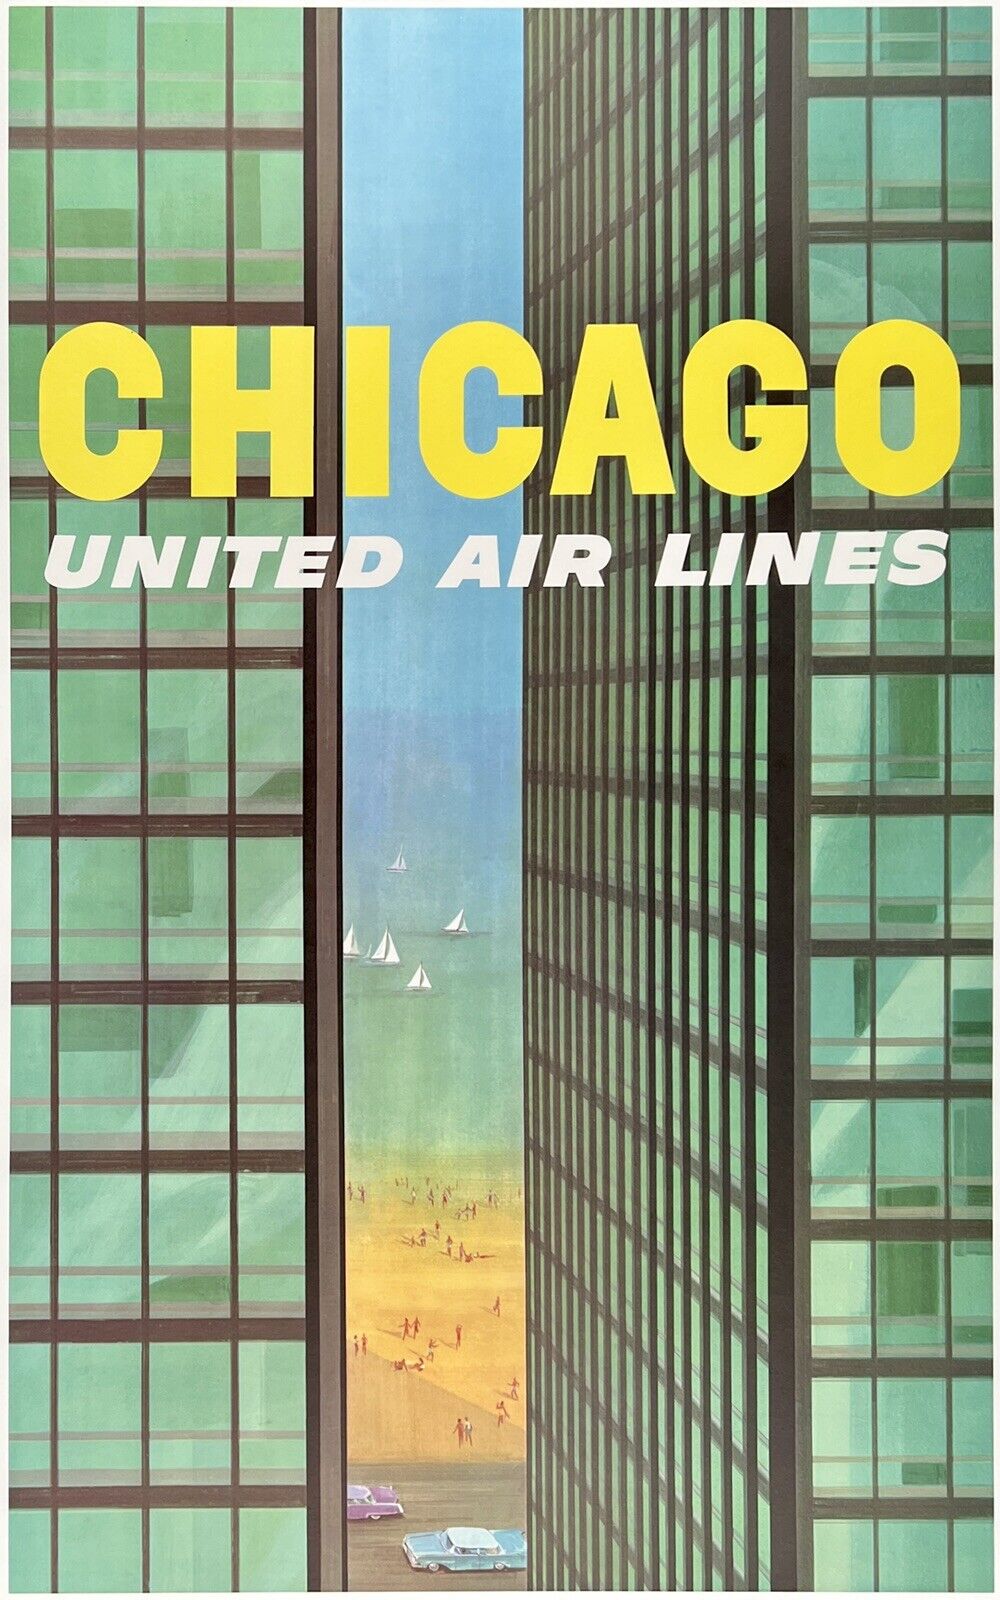 Original Vintage Poster CHICAGO UNITED AIR LINES Airline Travel Mies Galli LINEN